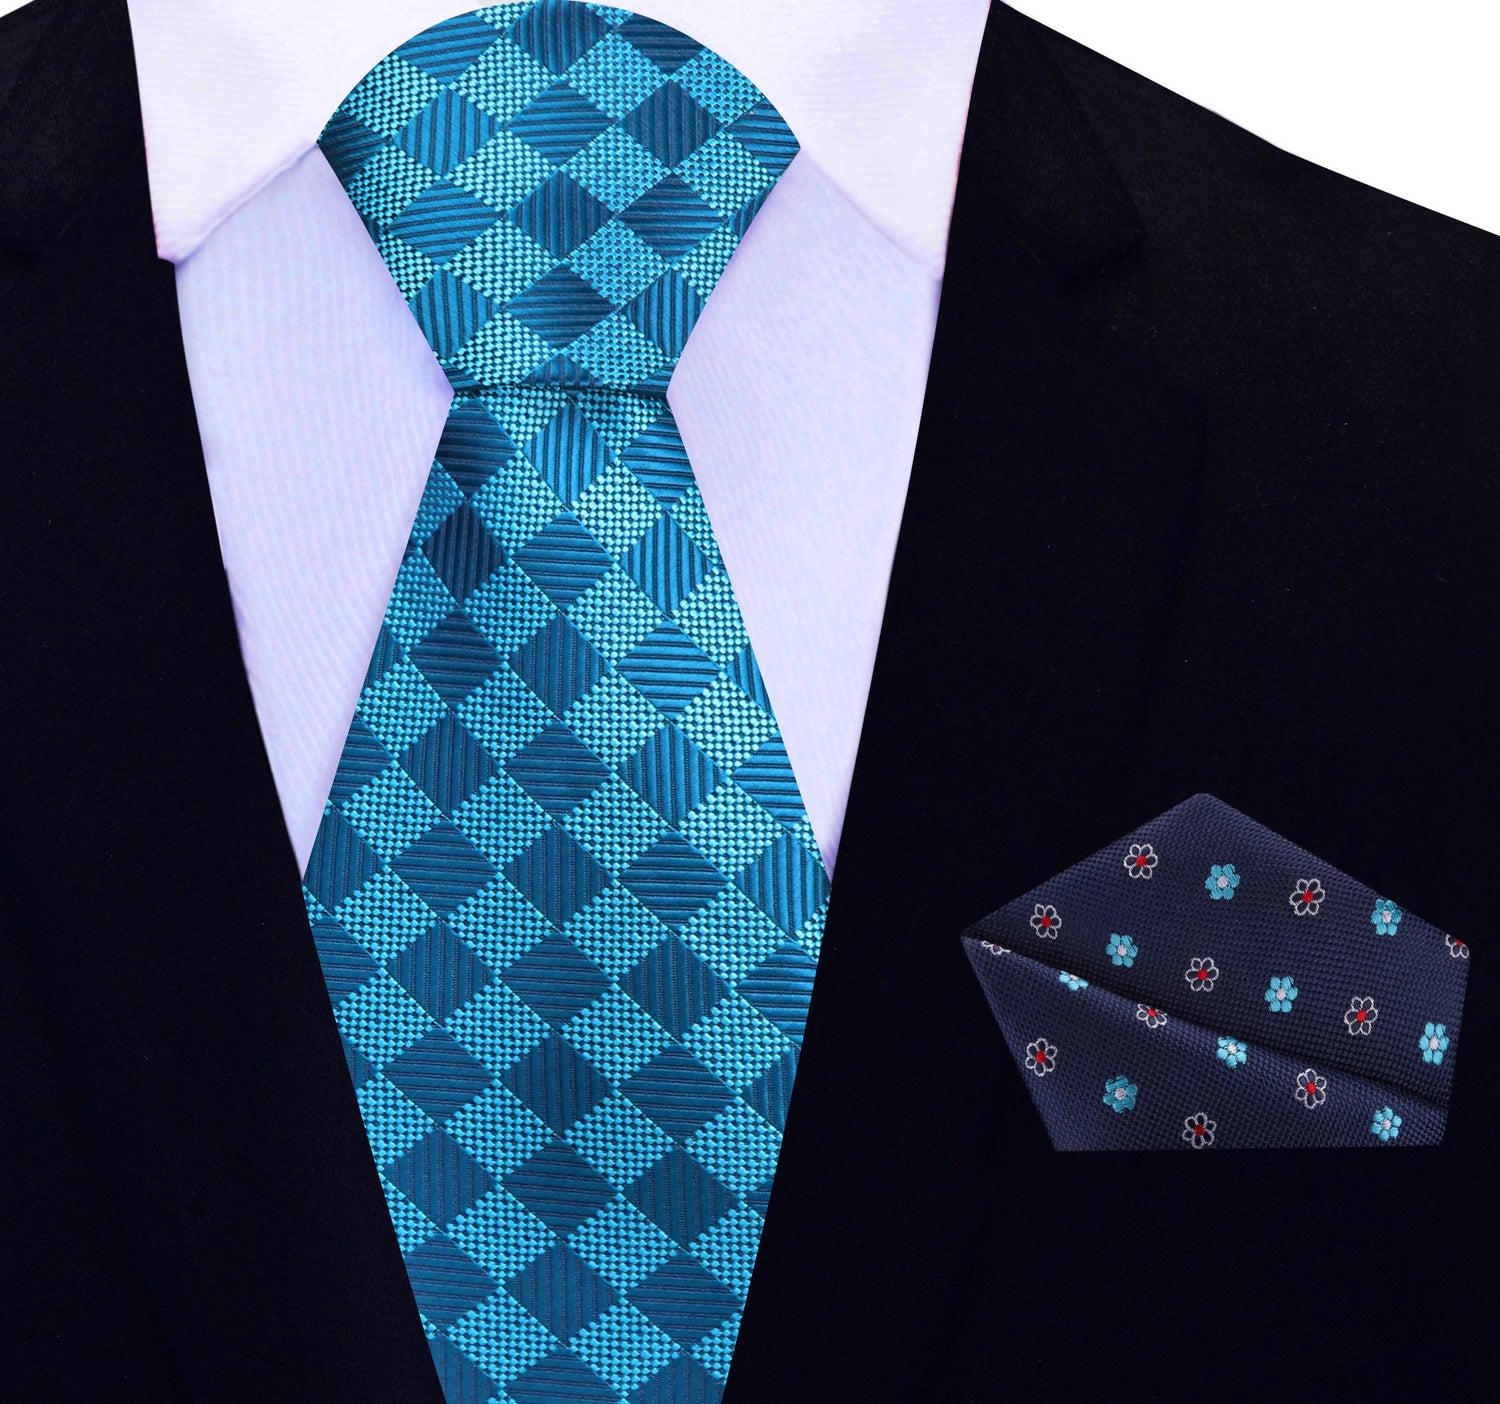 Rich Cyan Blue Geometric Diamonds Tie and Accenting Floral Square